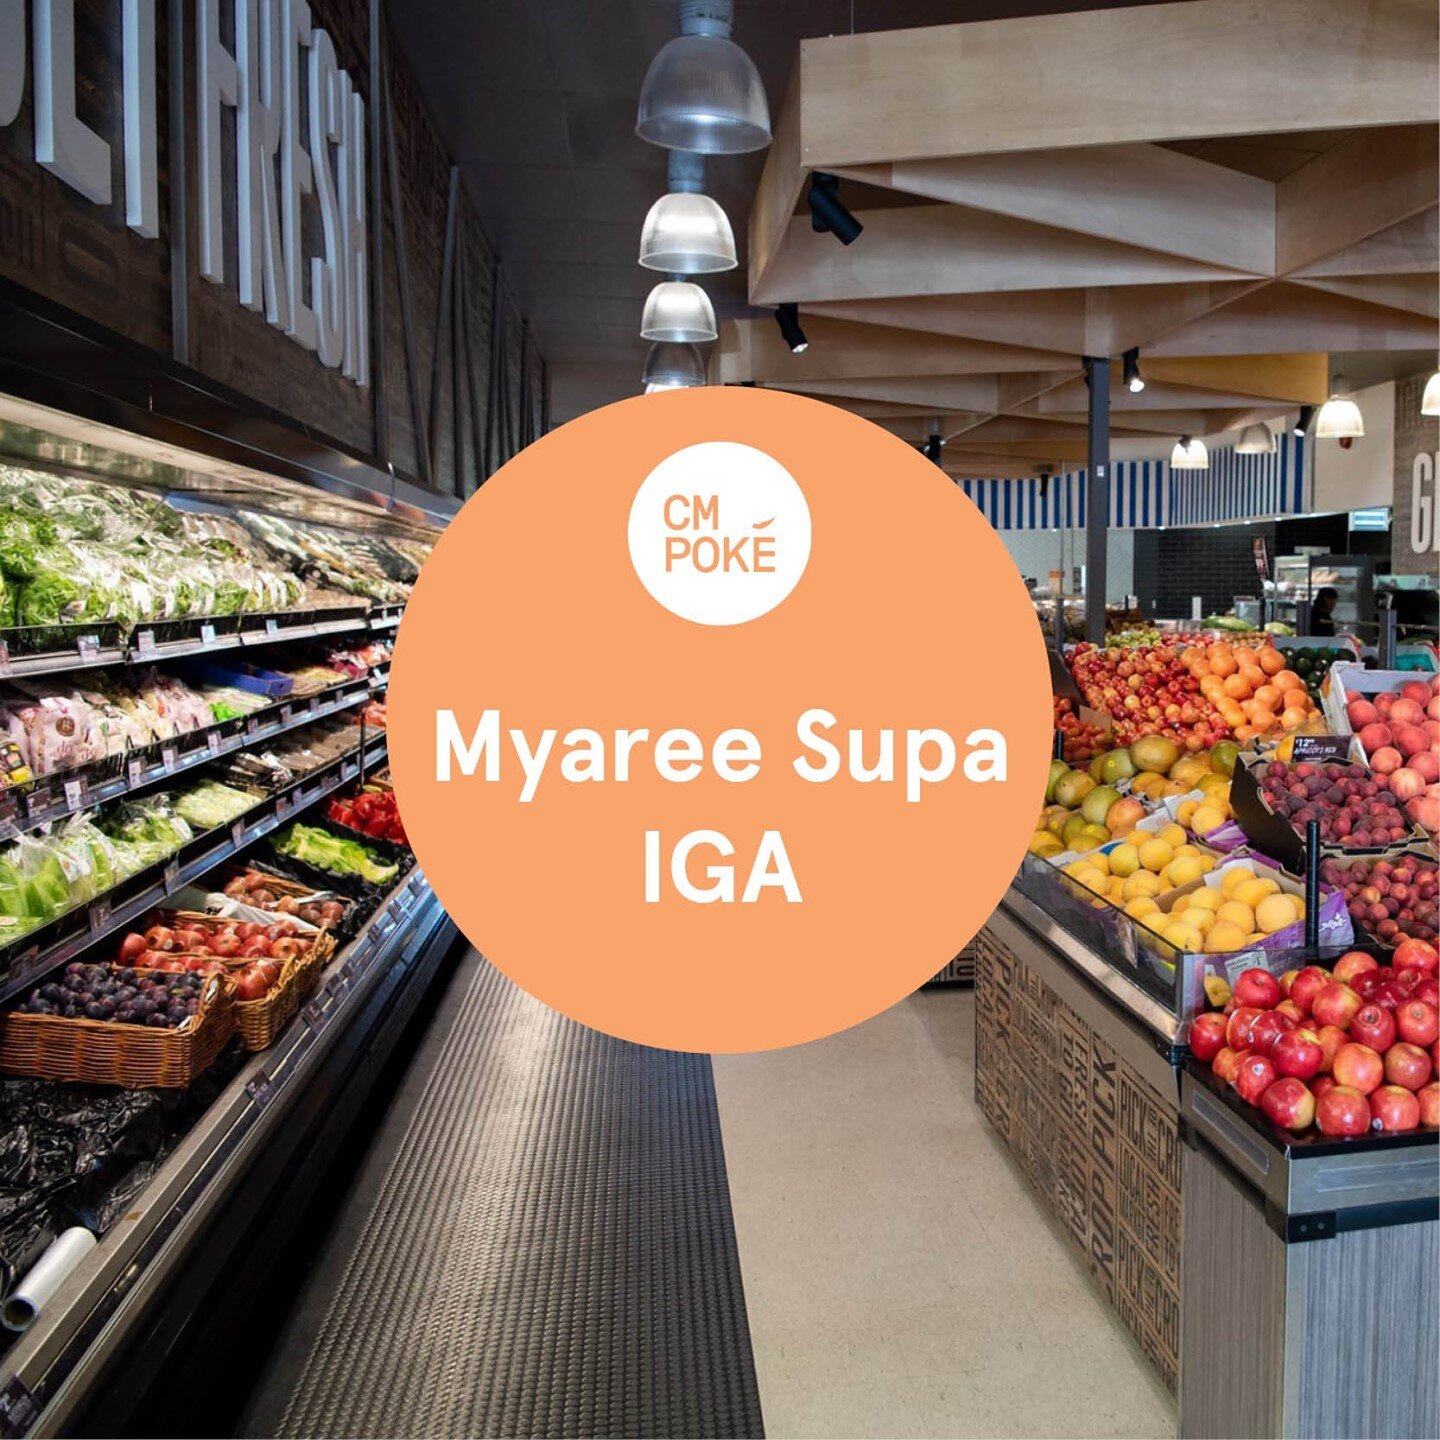 🥗 @MyareeSupaIGA is our stockist of the week!! 

If you're in the area, grab a pok&eacute; or one of their delicious gourmet meals! 😋

Full stockists' list in our bio 🔗